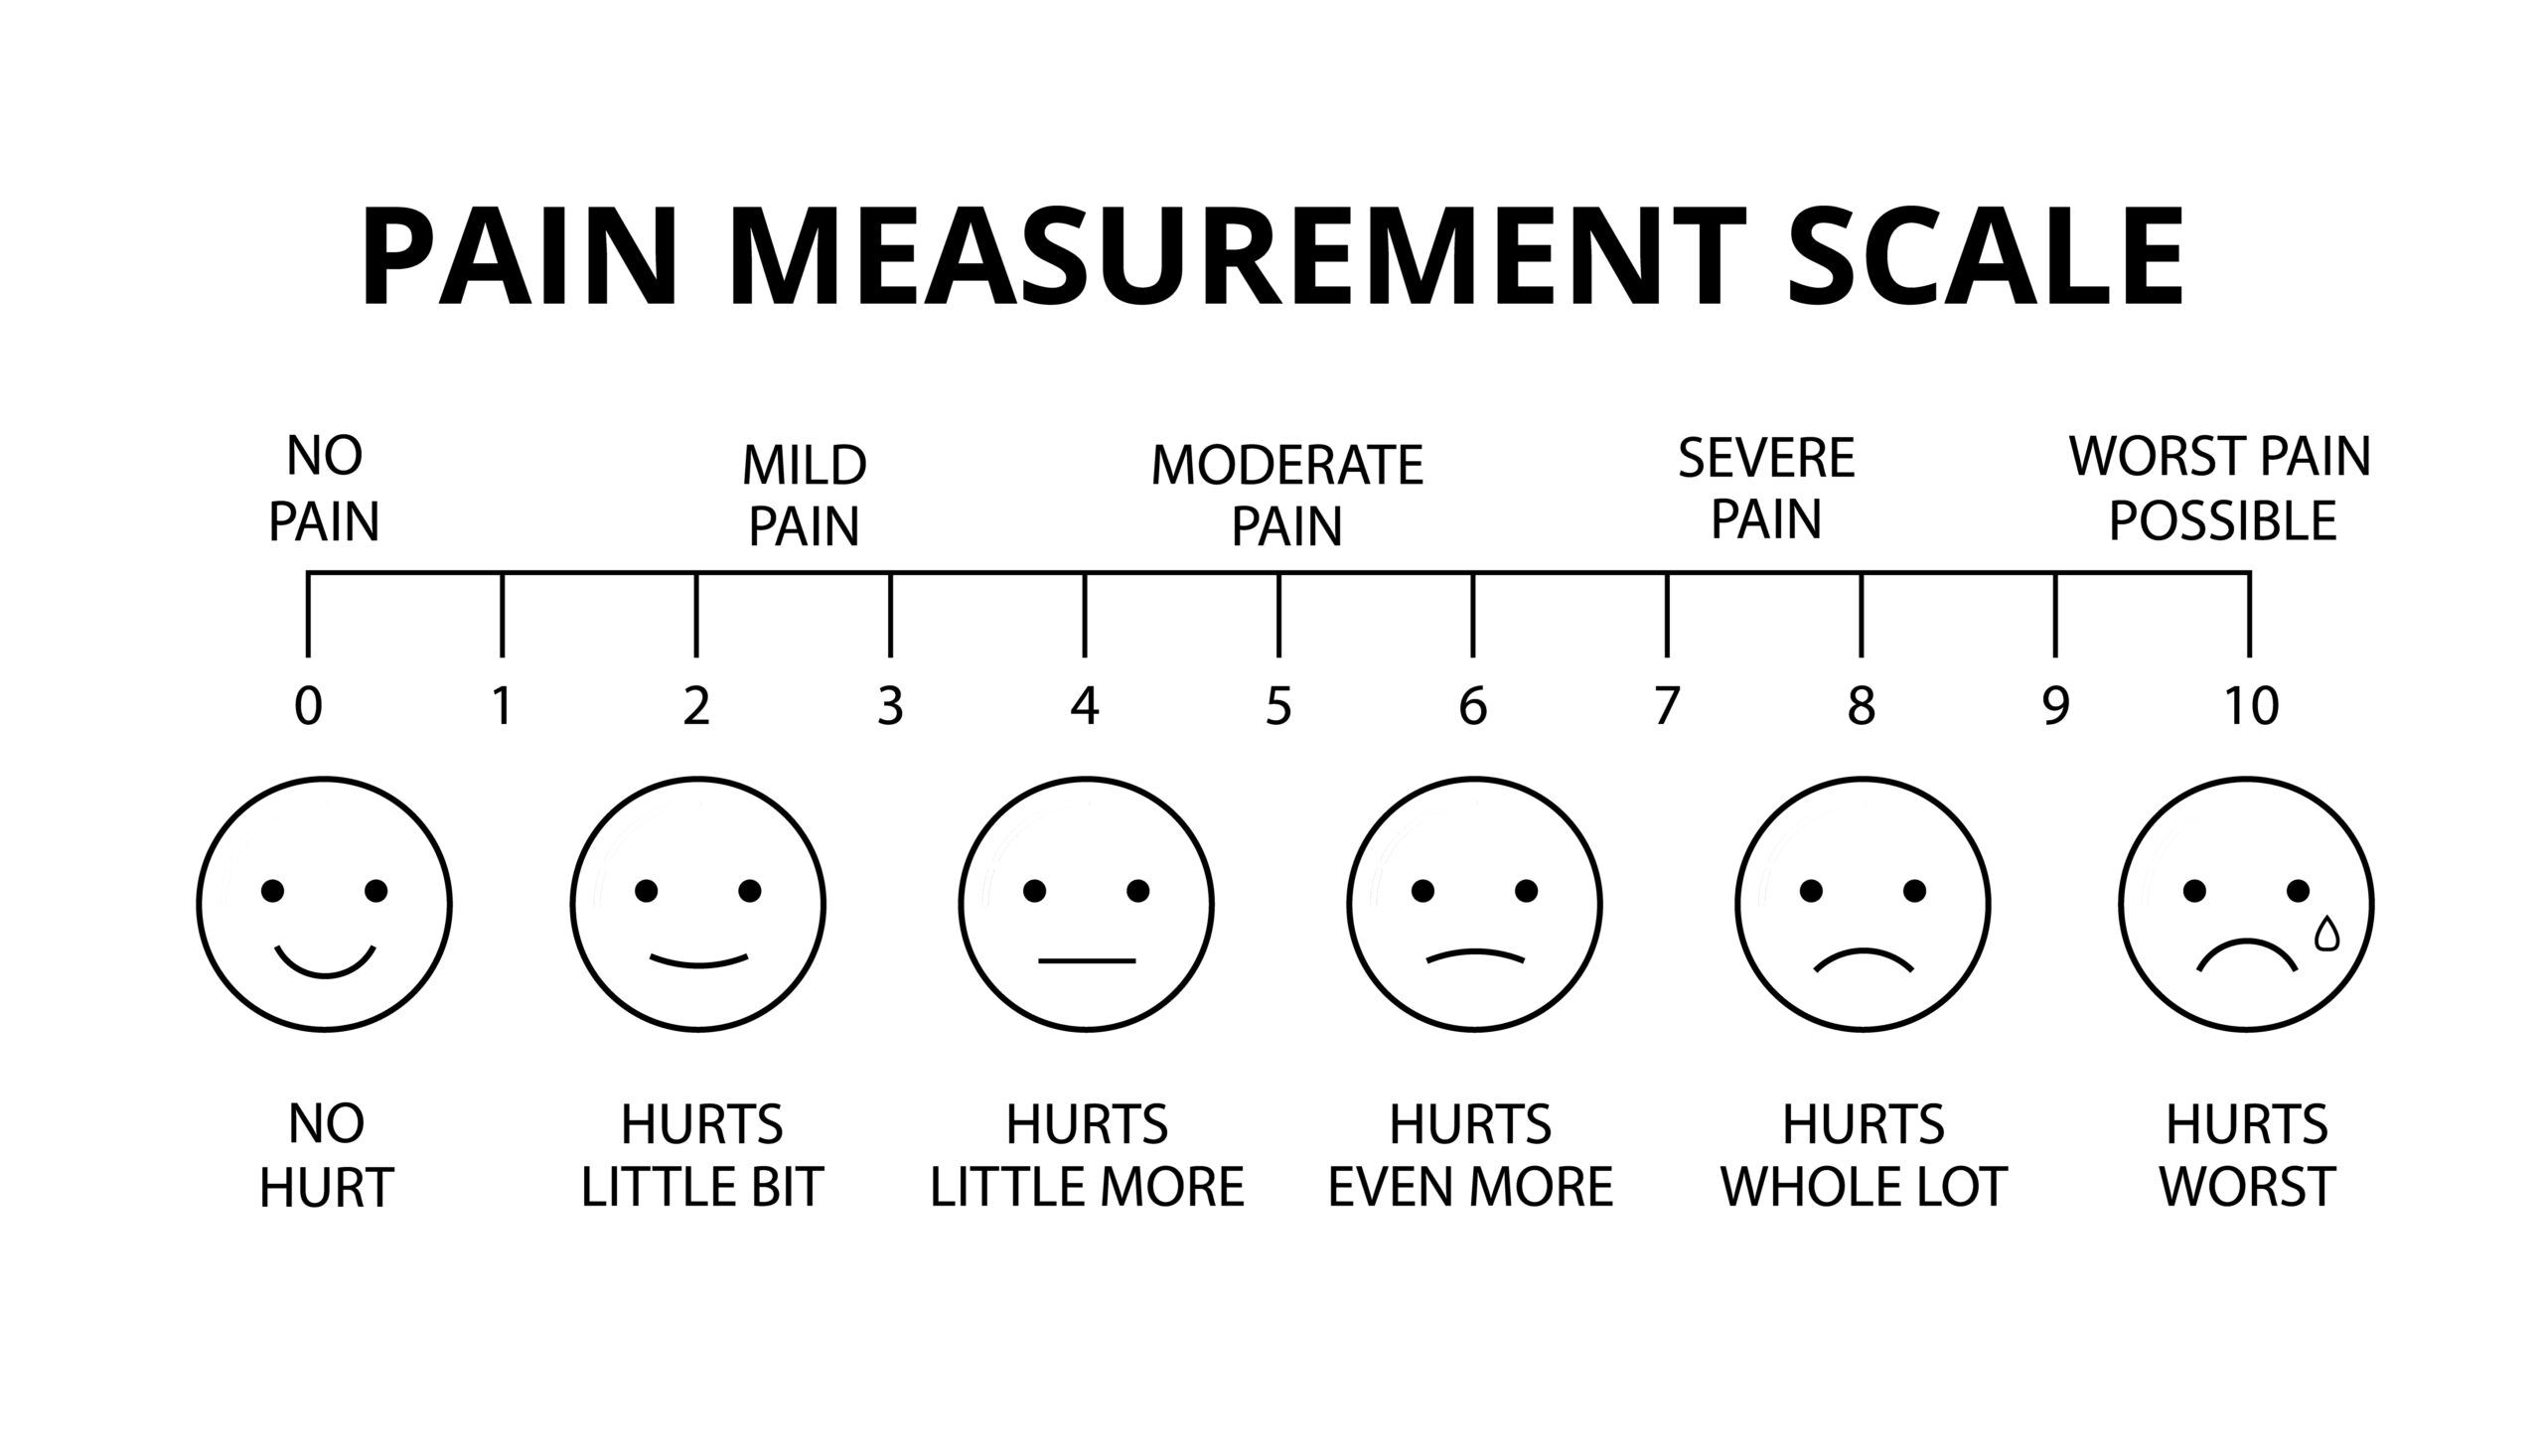 It’s time to replace the 0 to 10 pain intensity scale with a better measure